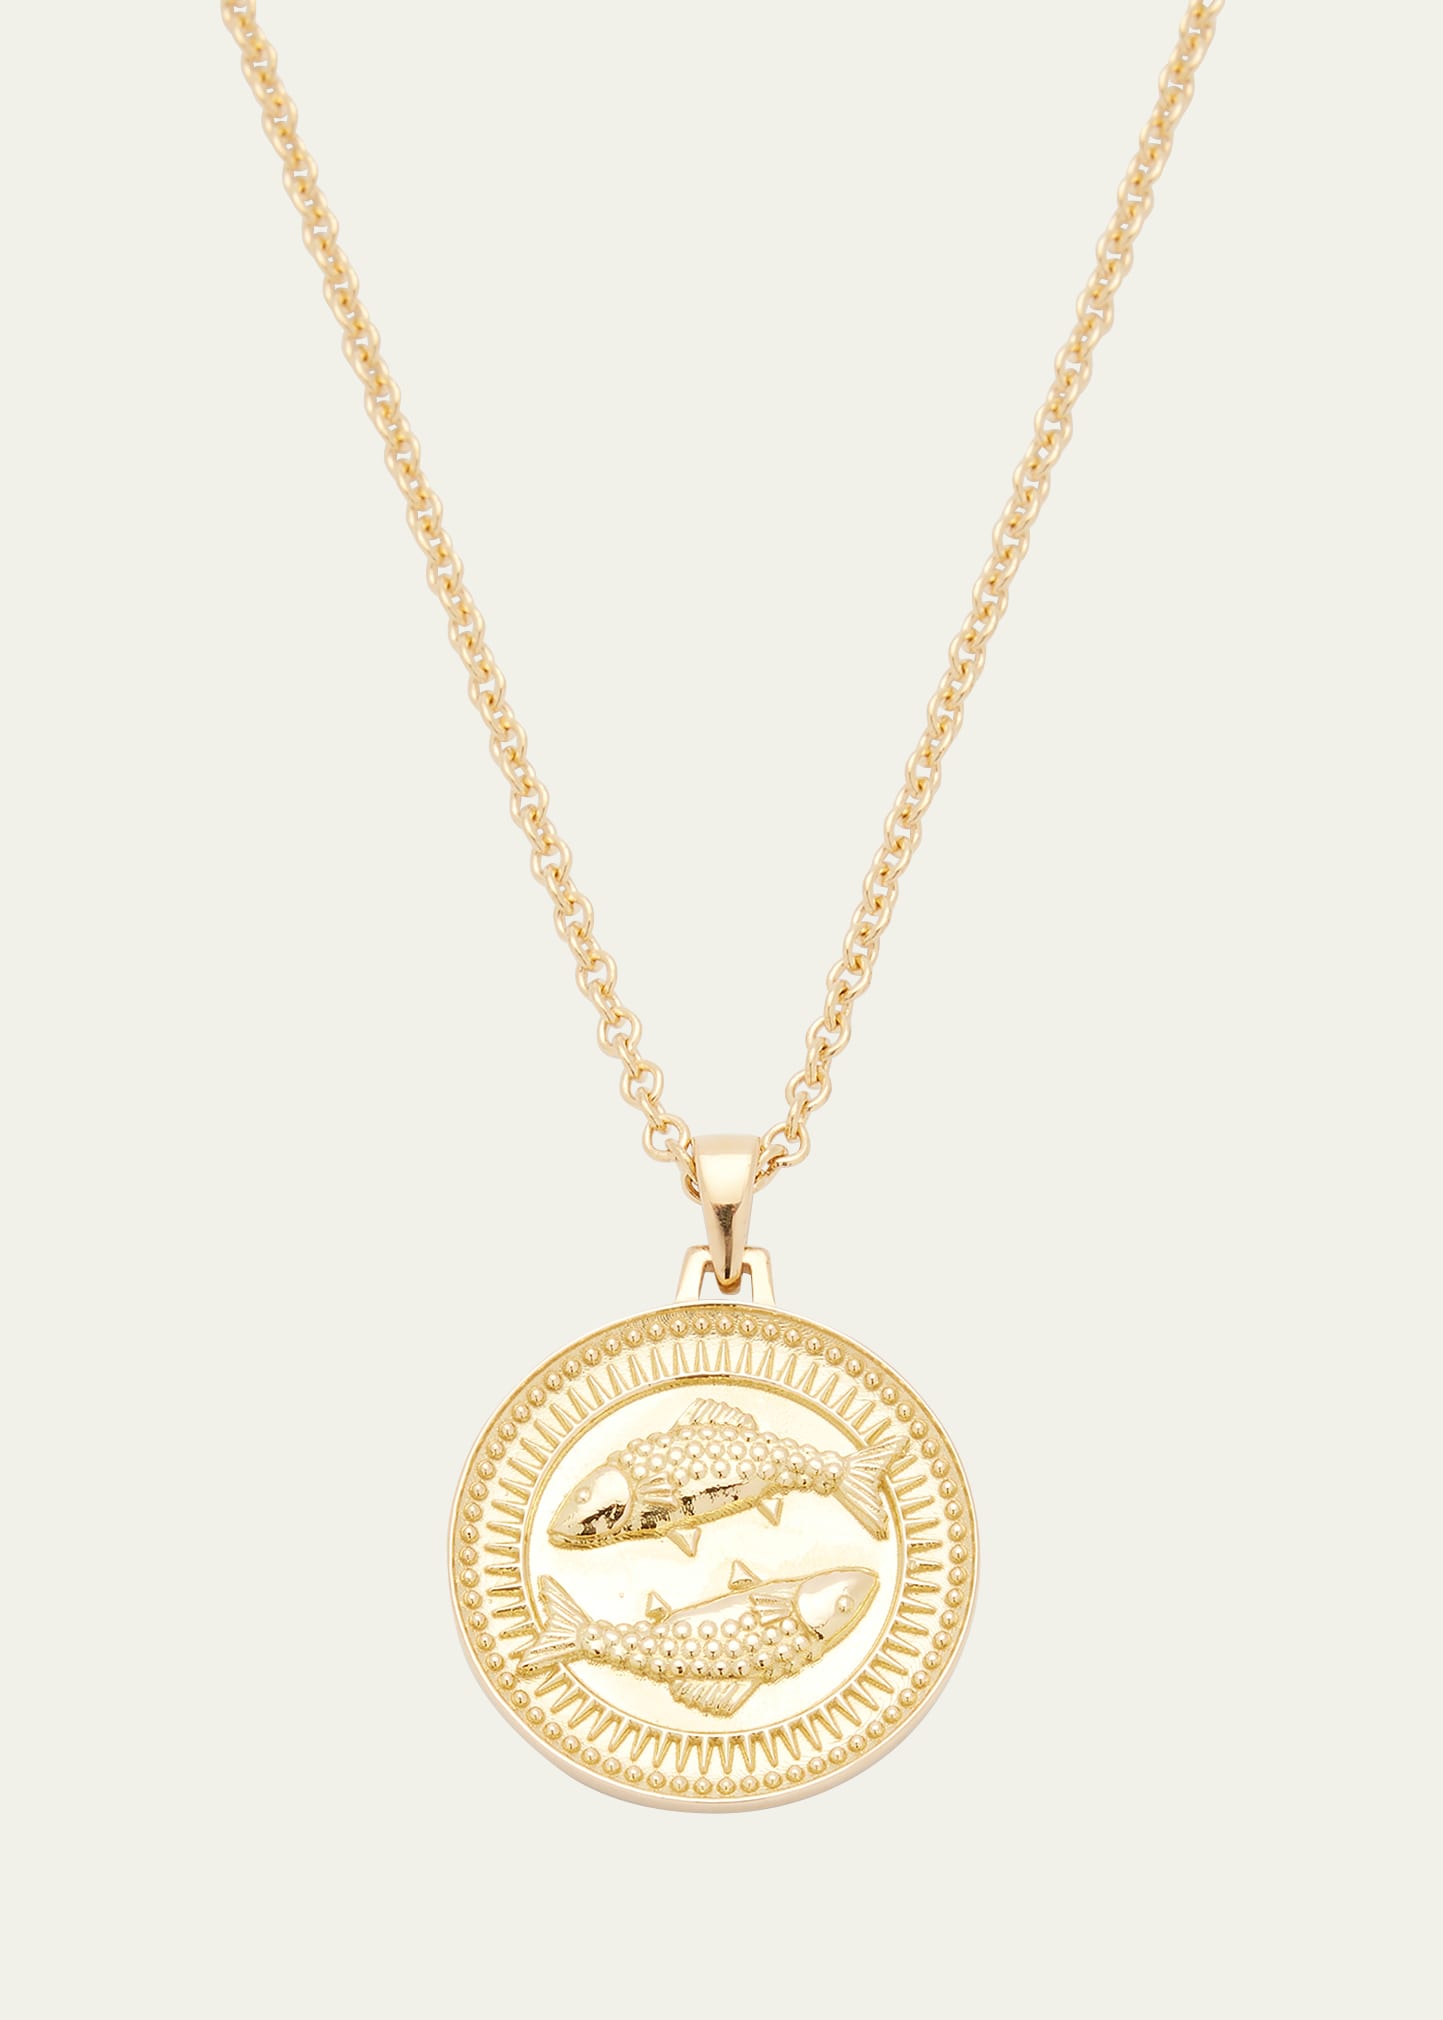 Futura Jewelry Fairmined Gold Pisces Necklace